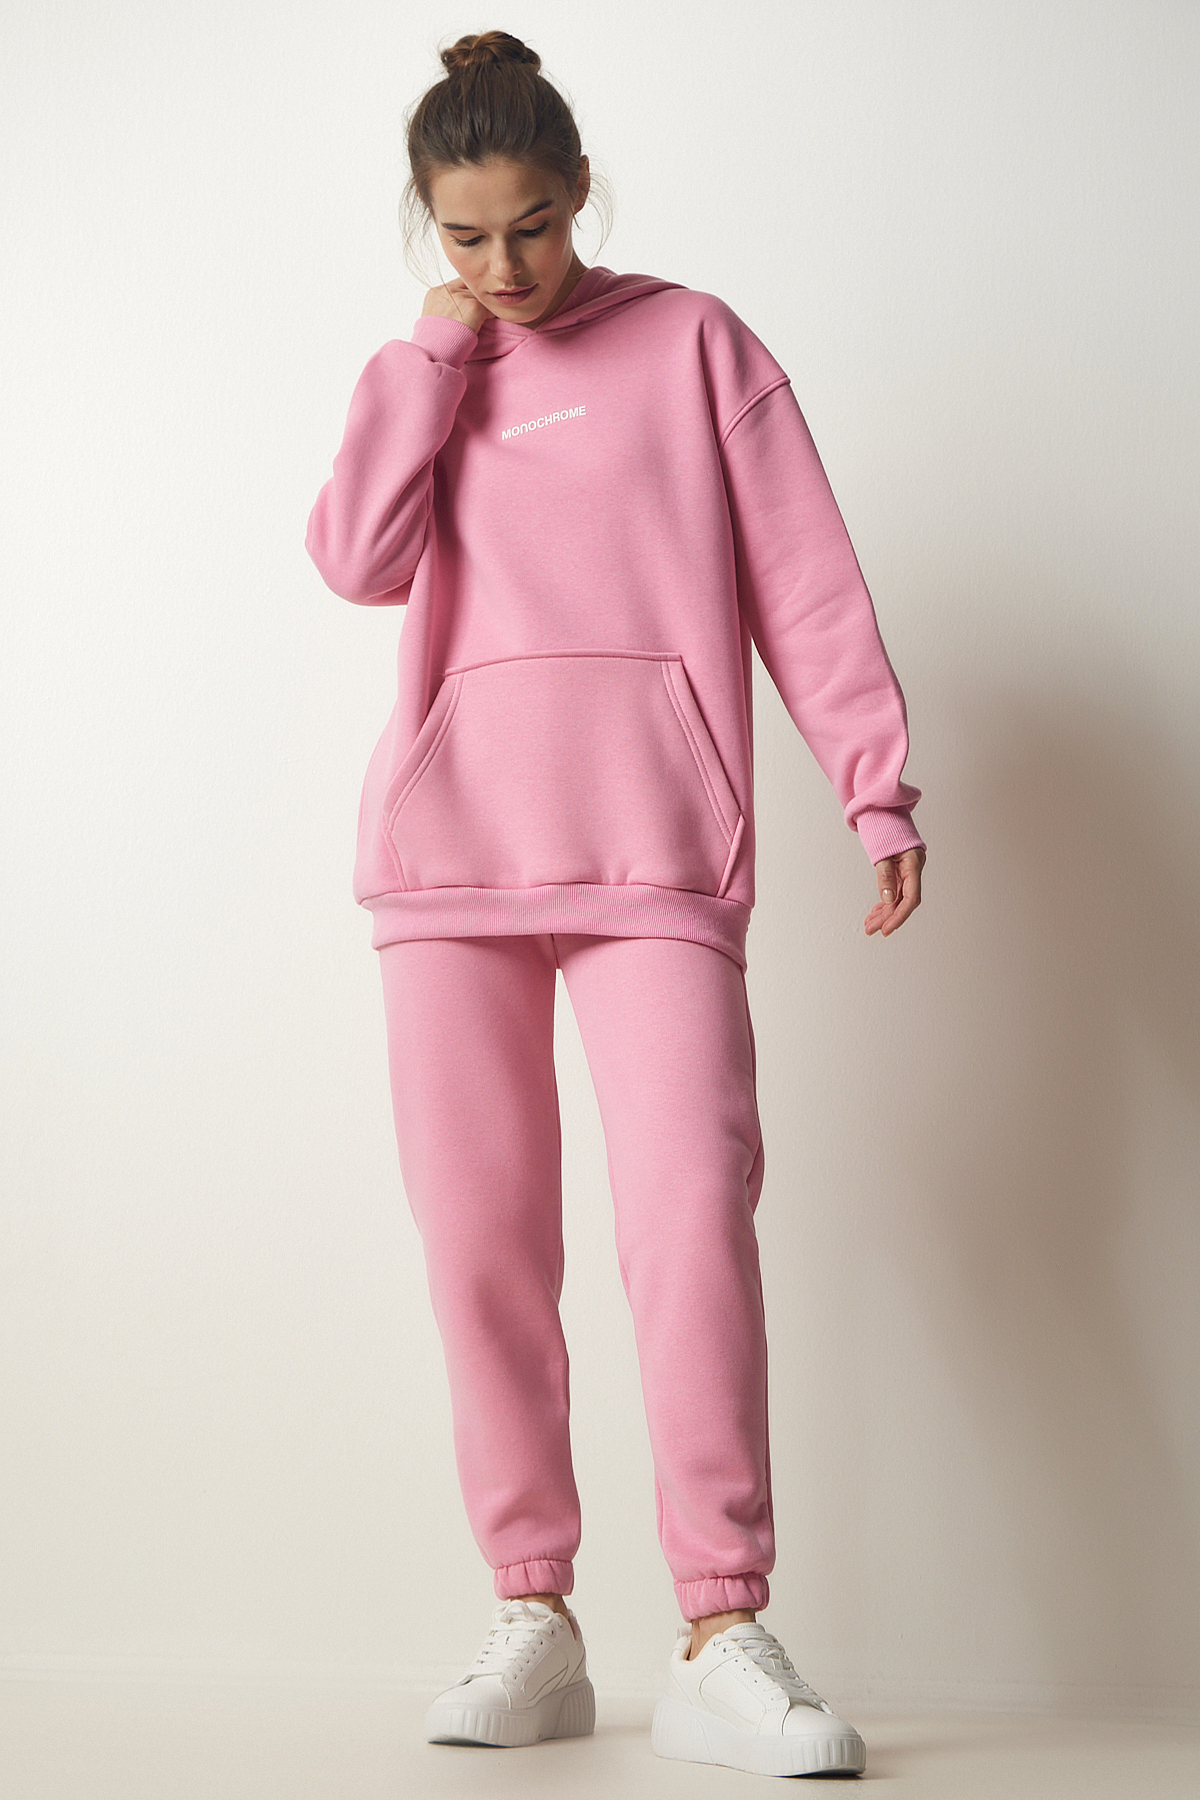 Levně Happiness İstanbul Women's Pink Raised Knitted Tracksuit Set